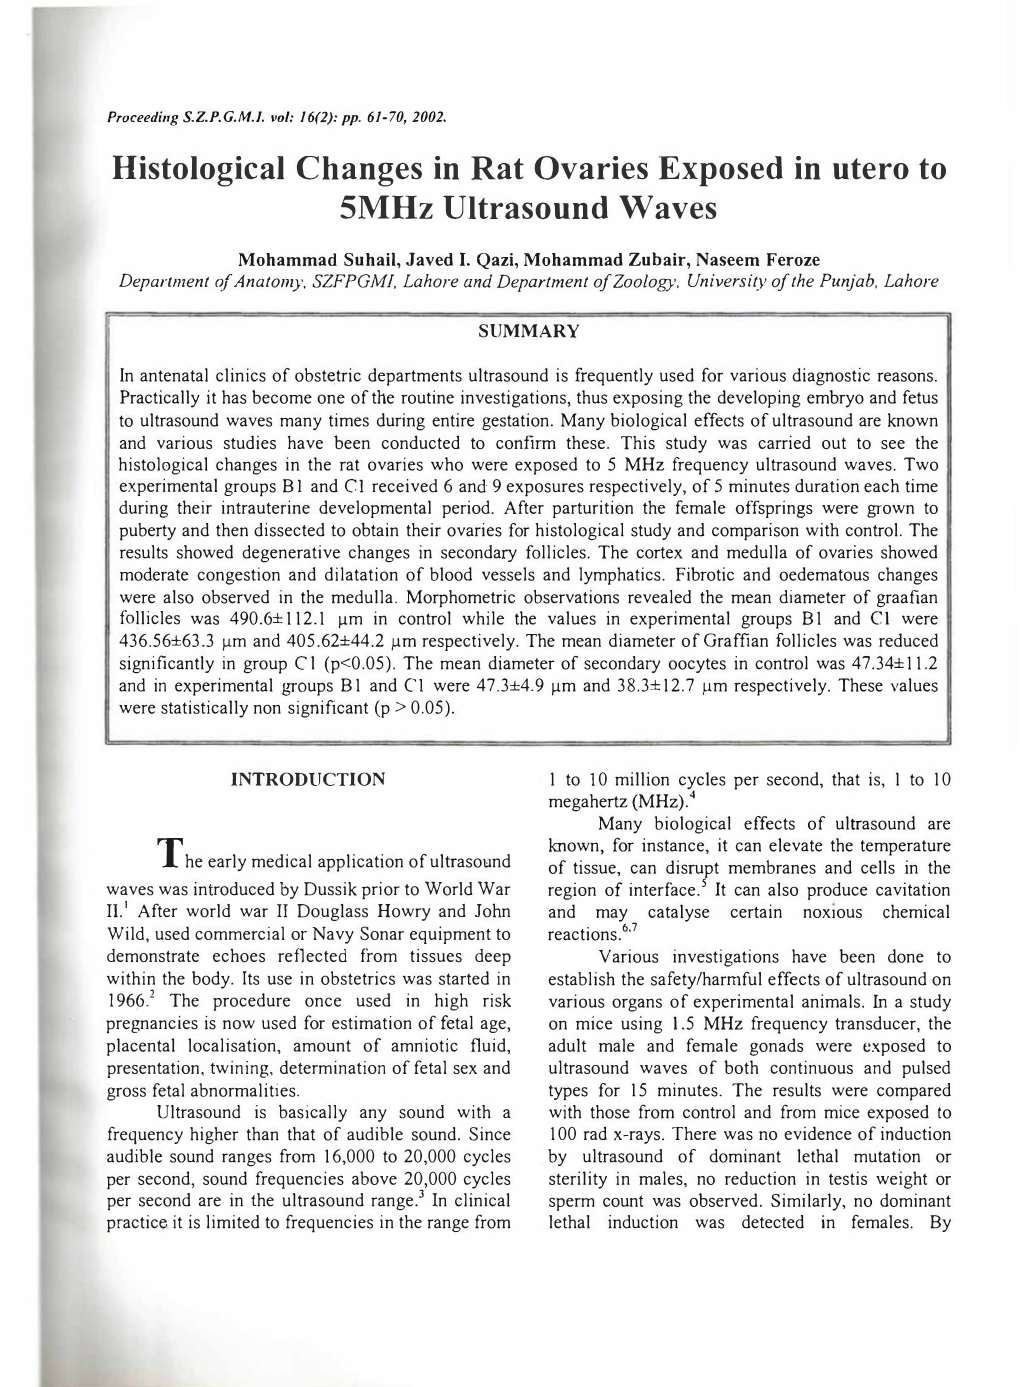 Histological Changes in Rat Ovaries Exposed in Utero to Smhz Ultrasound Waves